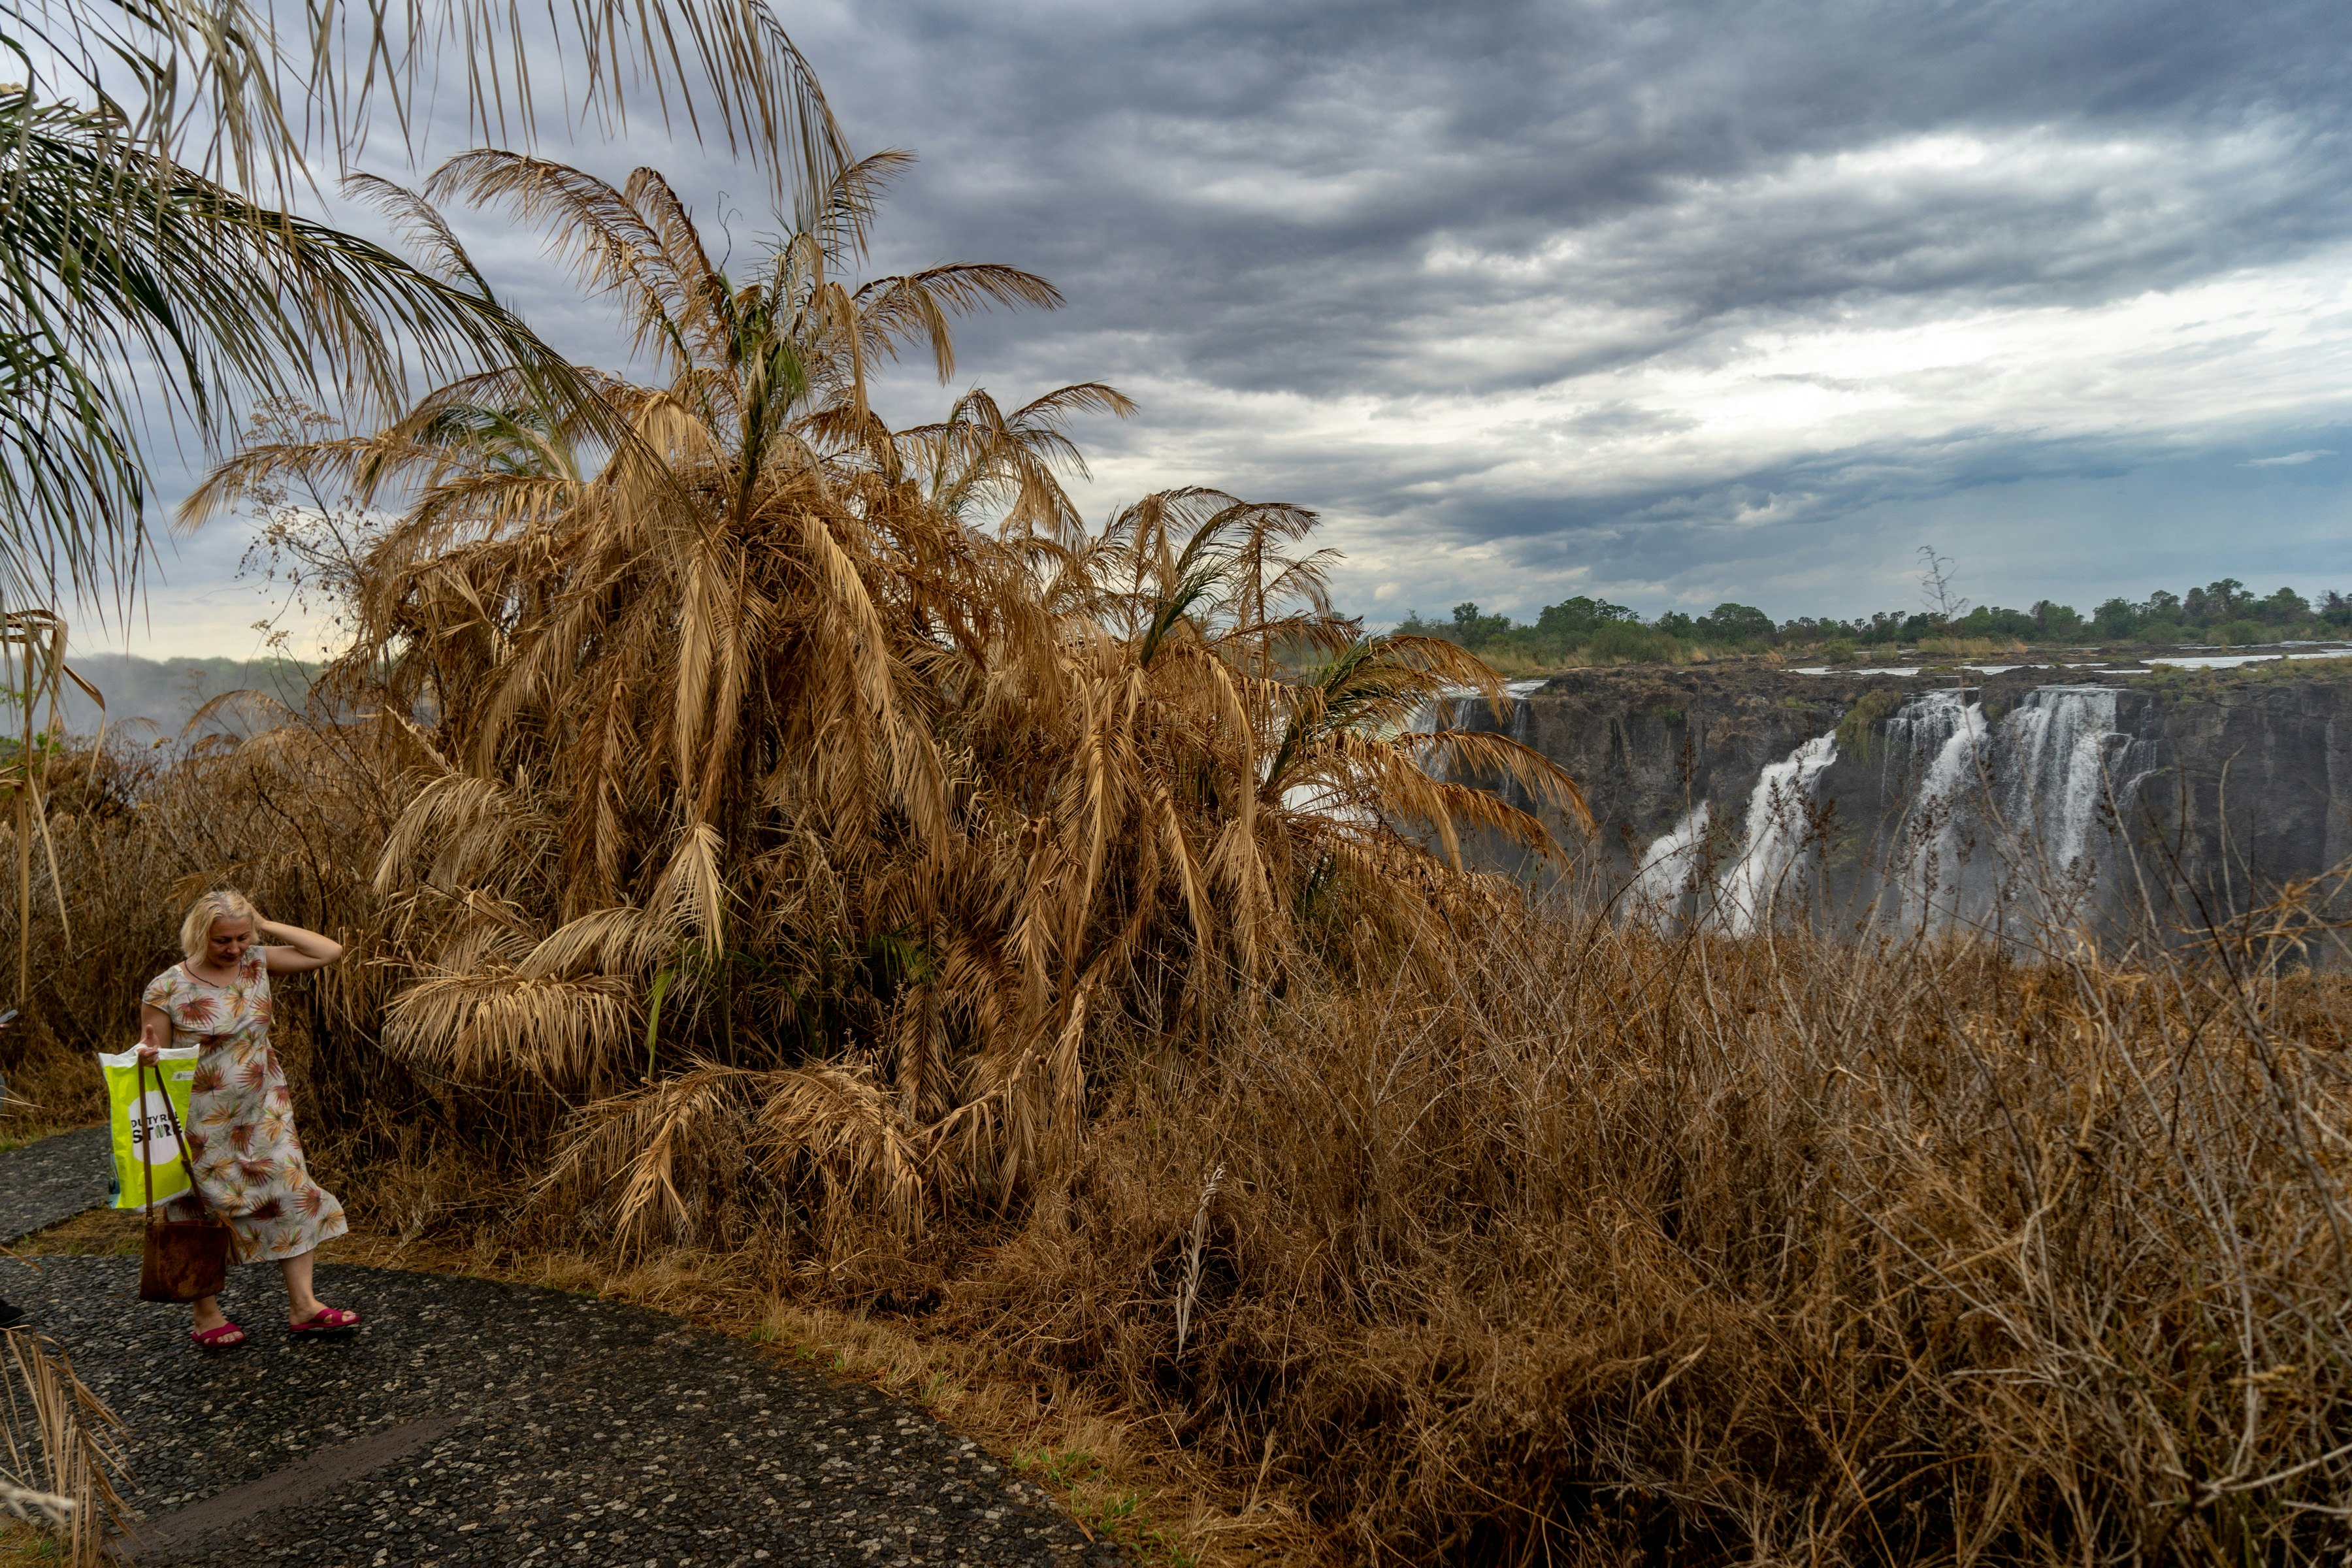 A woman with blond hair in a floral sun dress walks past dry, brown palms and other vegetation with the cascades of Victoria Falls in the background